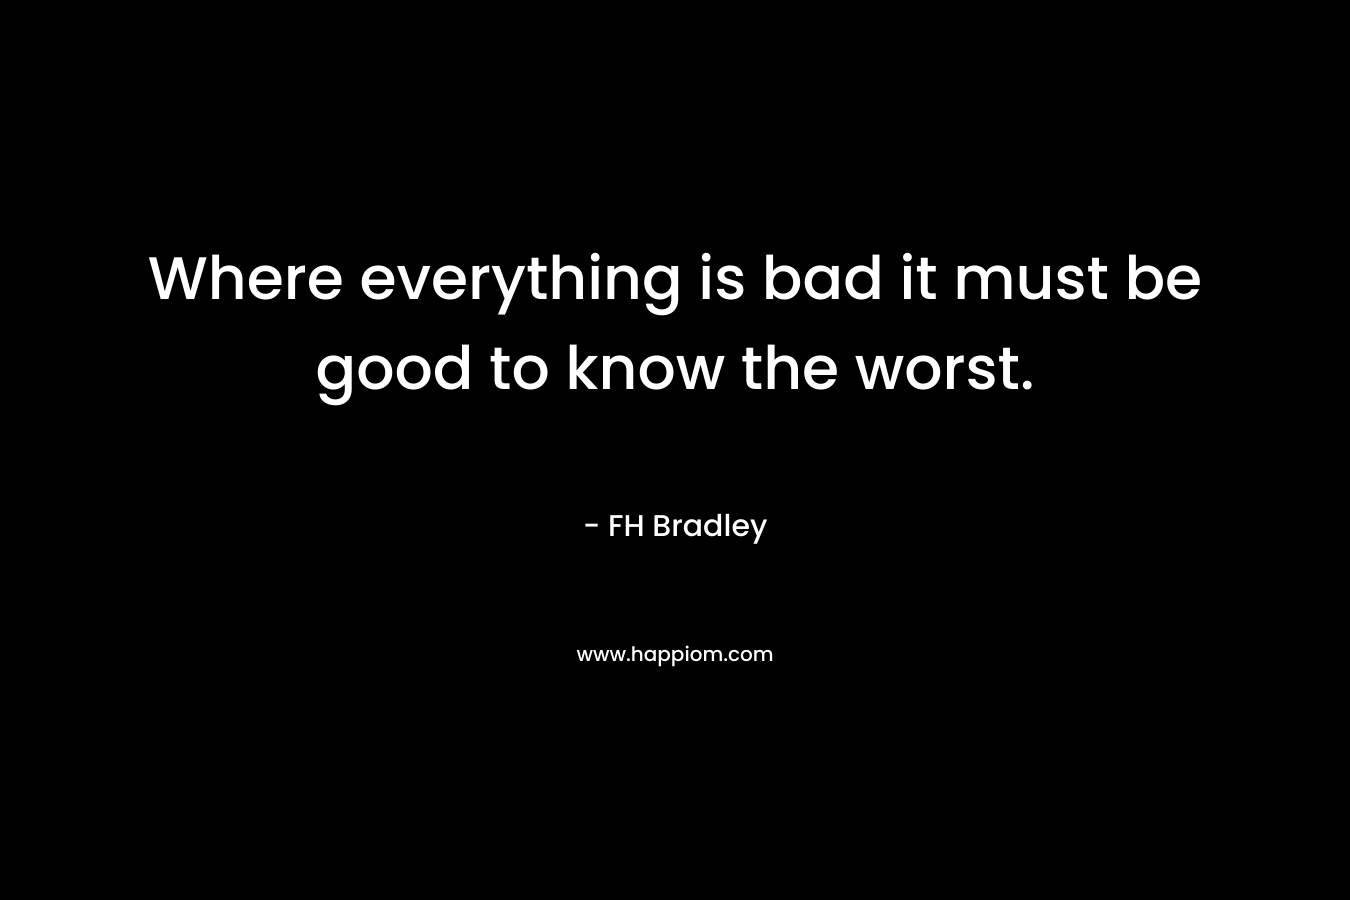 Where everything is bad it must be good to know the worst.